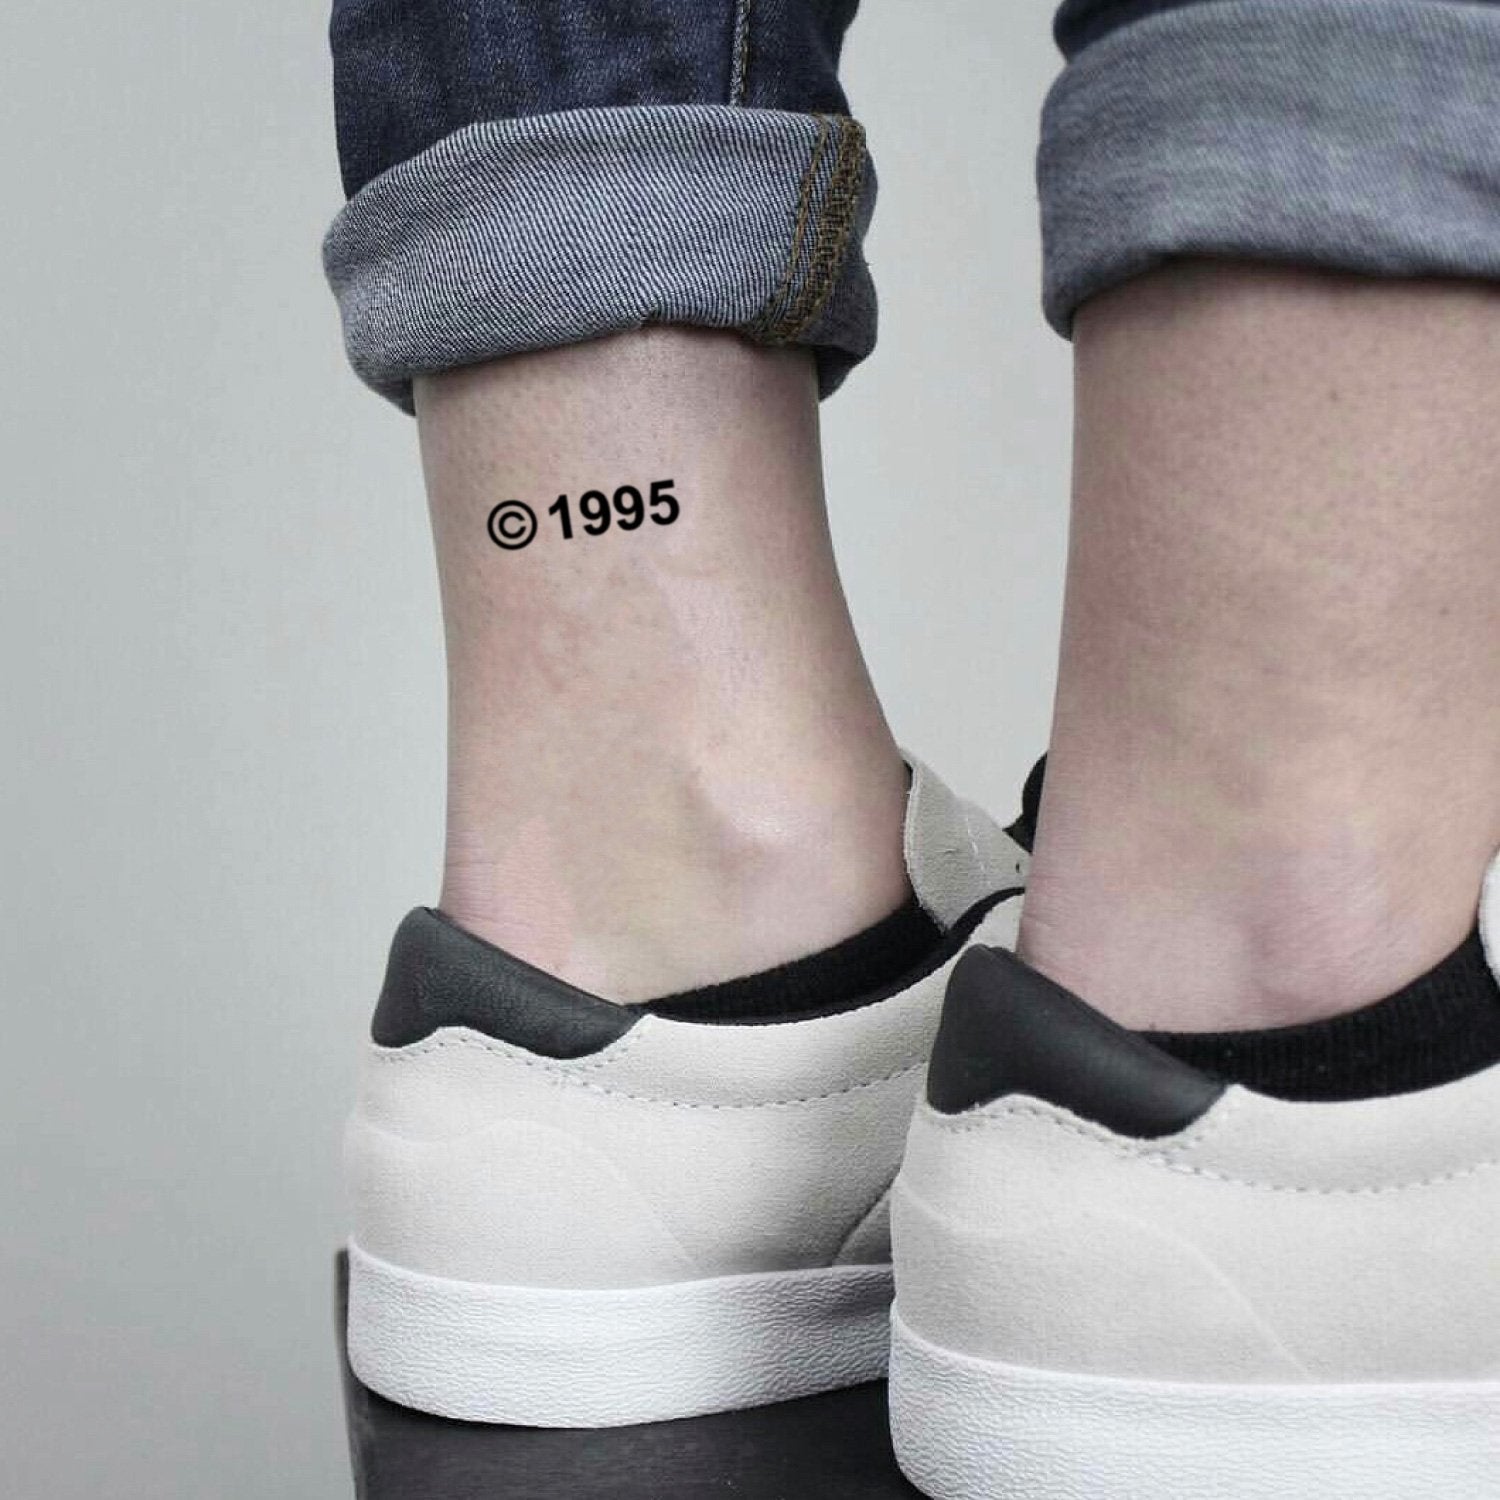 fake small 1995 copyright birth year bday birthday lettering temporary tattoo sticker design idea on ankle